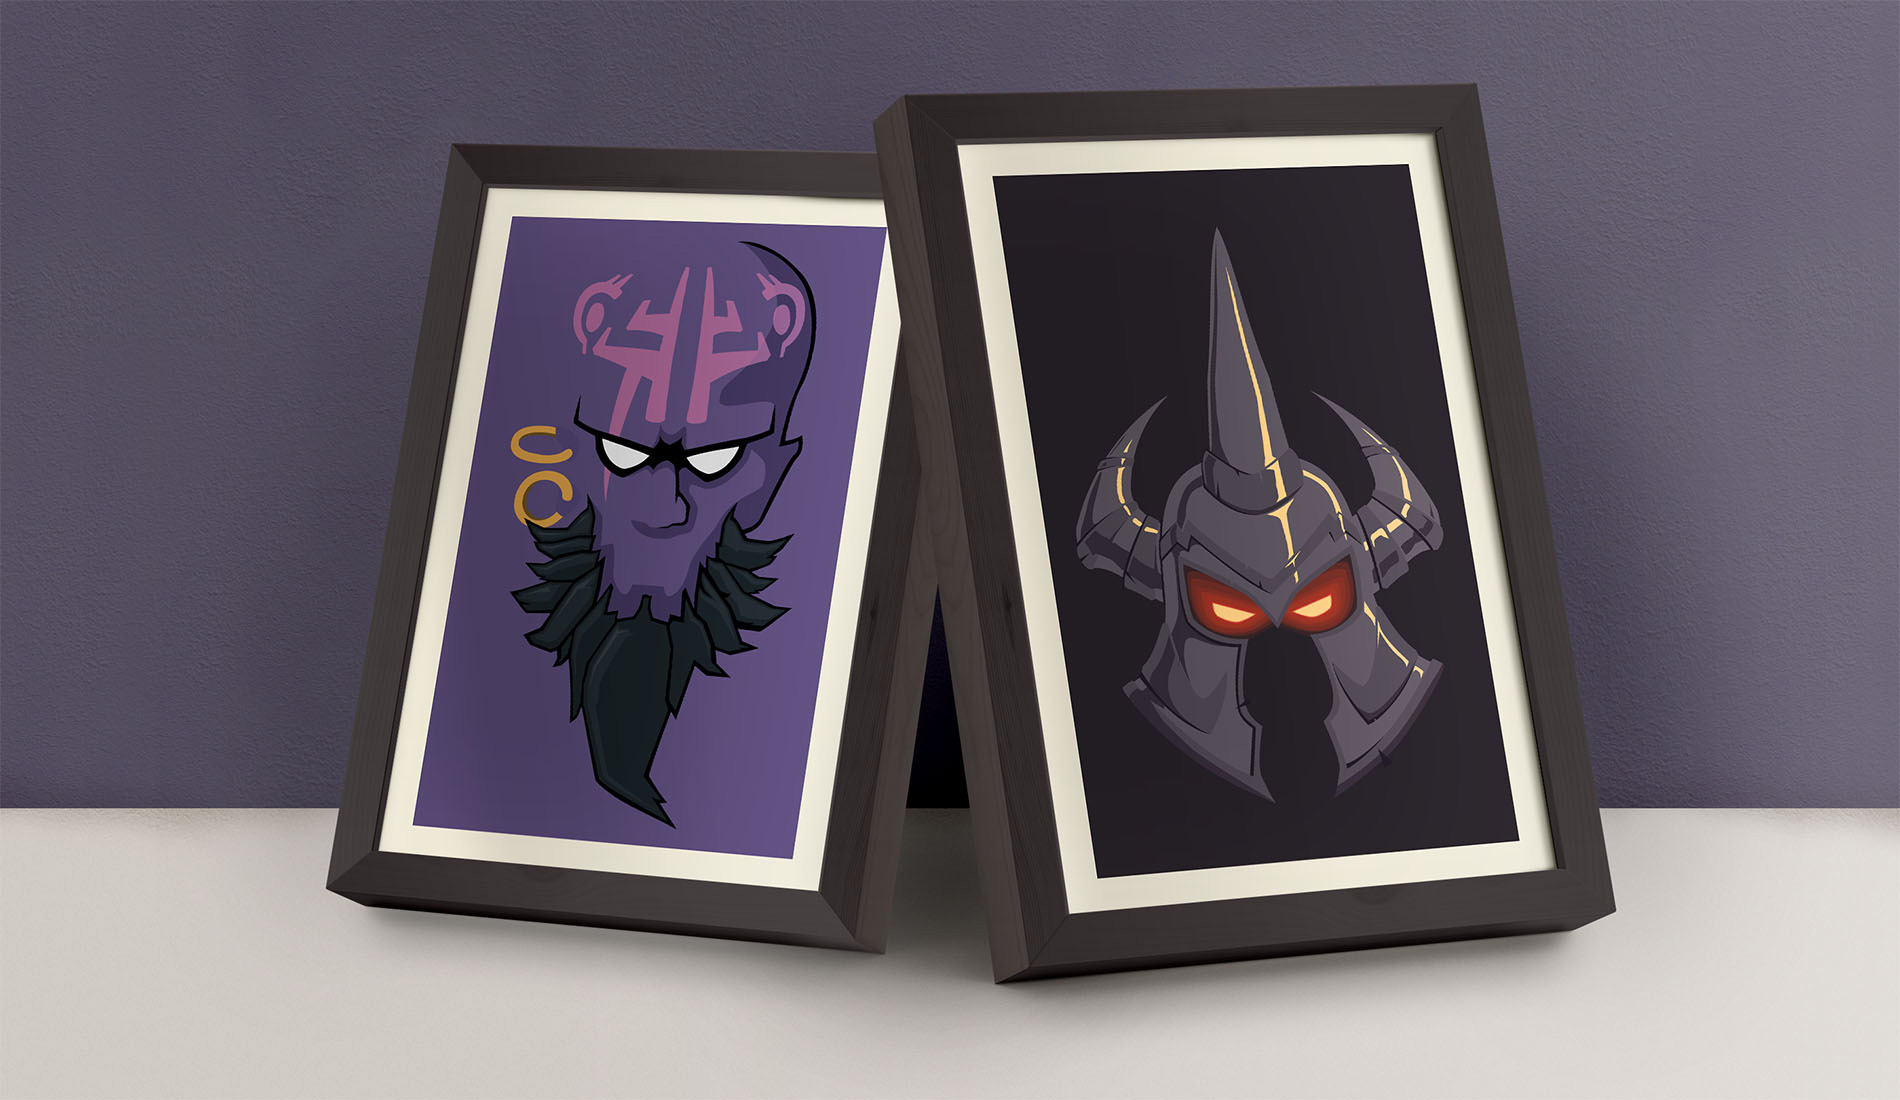 Minimalist Posters for Riot Games